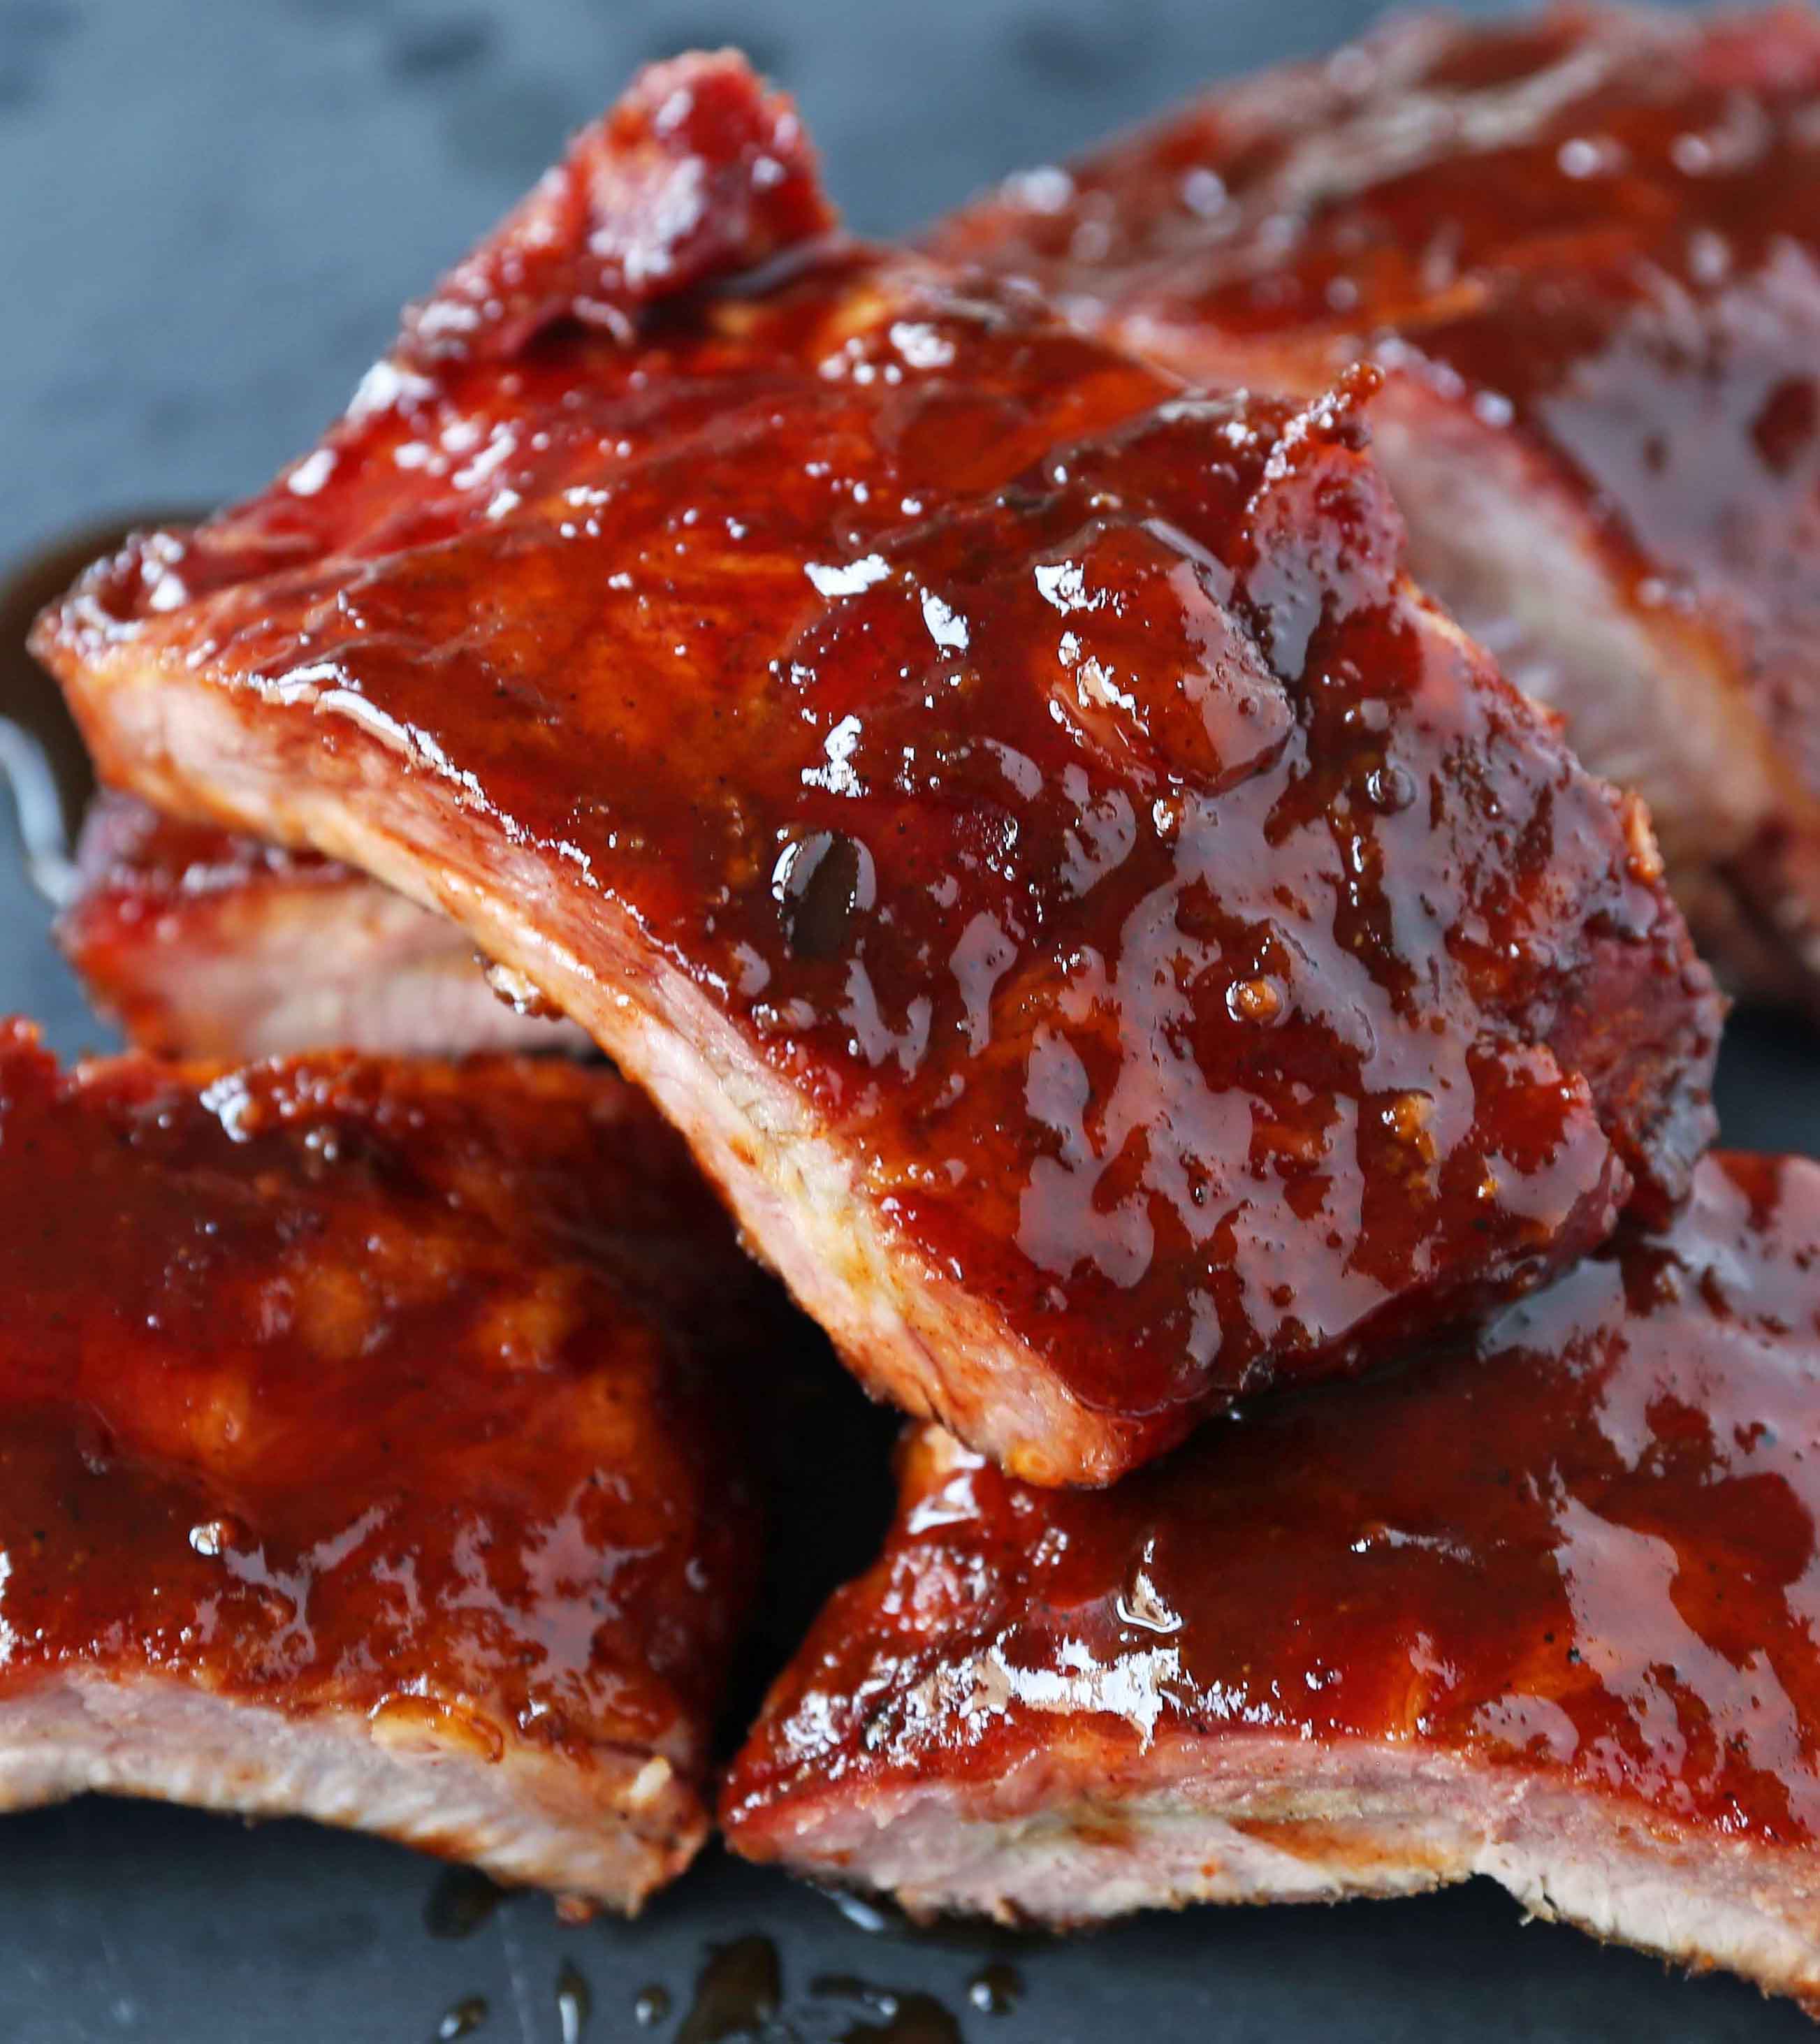 Smoked Baby Back Ribs. Tender, flavorful, fall-off-the-bone Pork Baby Back Ribs. How to smoke ribs or cook in the oven. Perfect BBQ Rub Recipe. #ribs #babybackribs